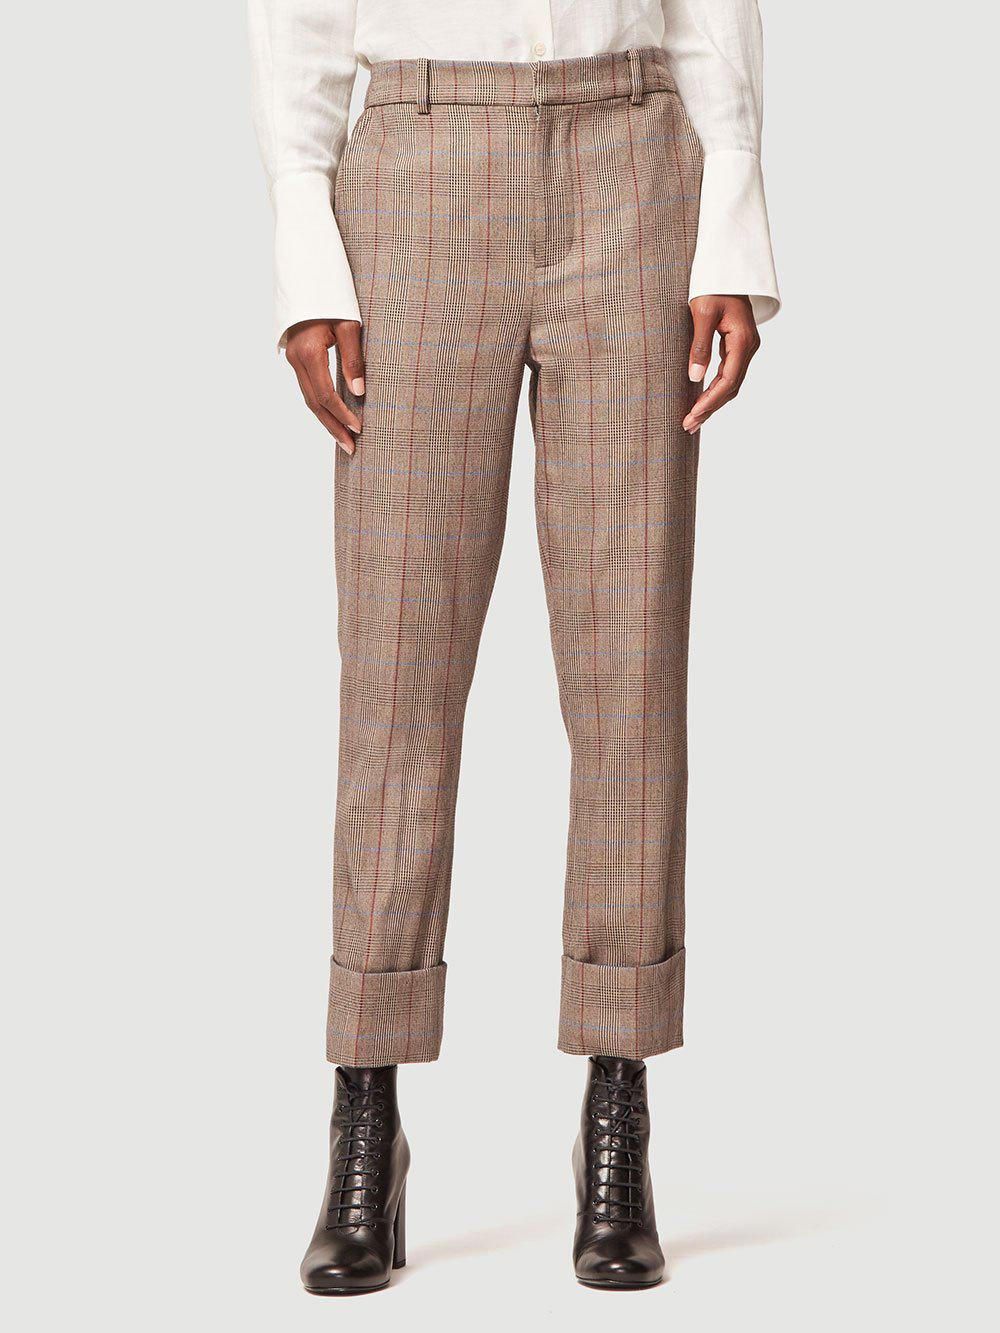 FRAME Wool Cuffed Plaid Pant in Brown 